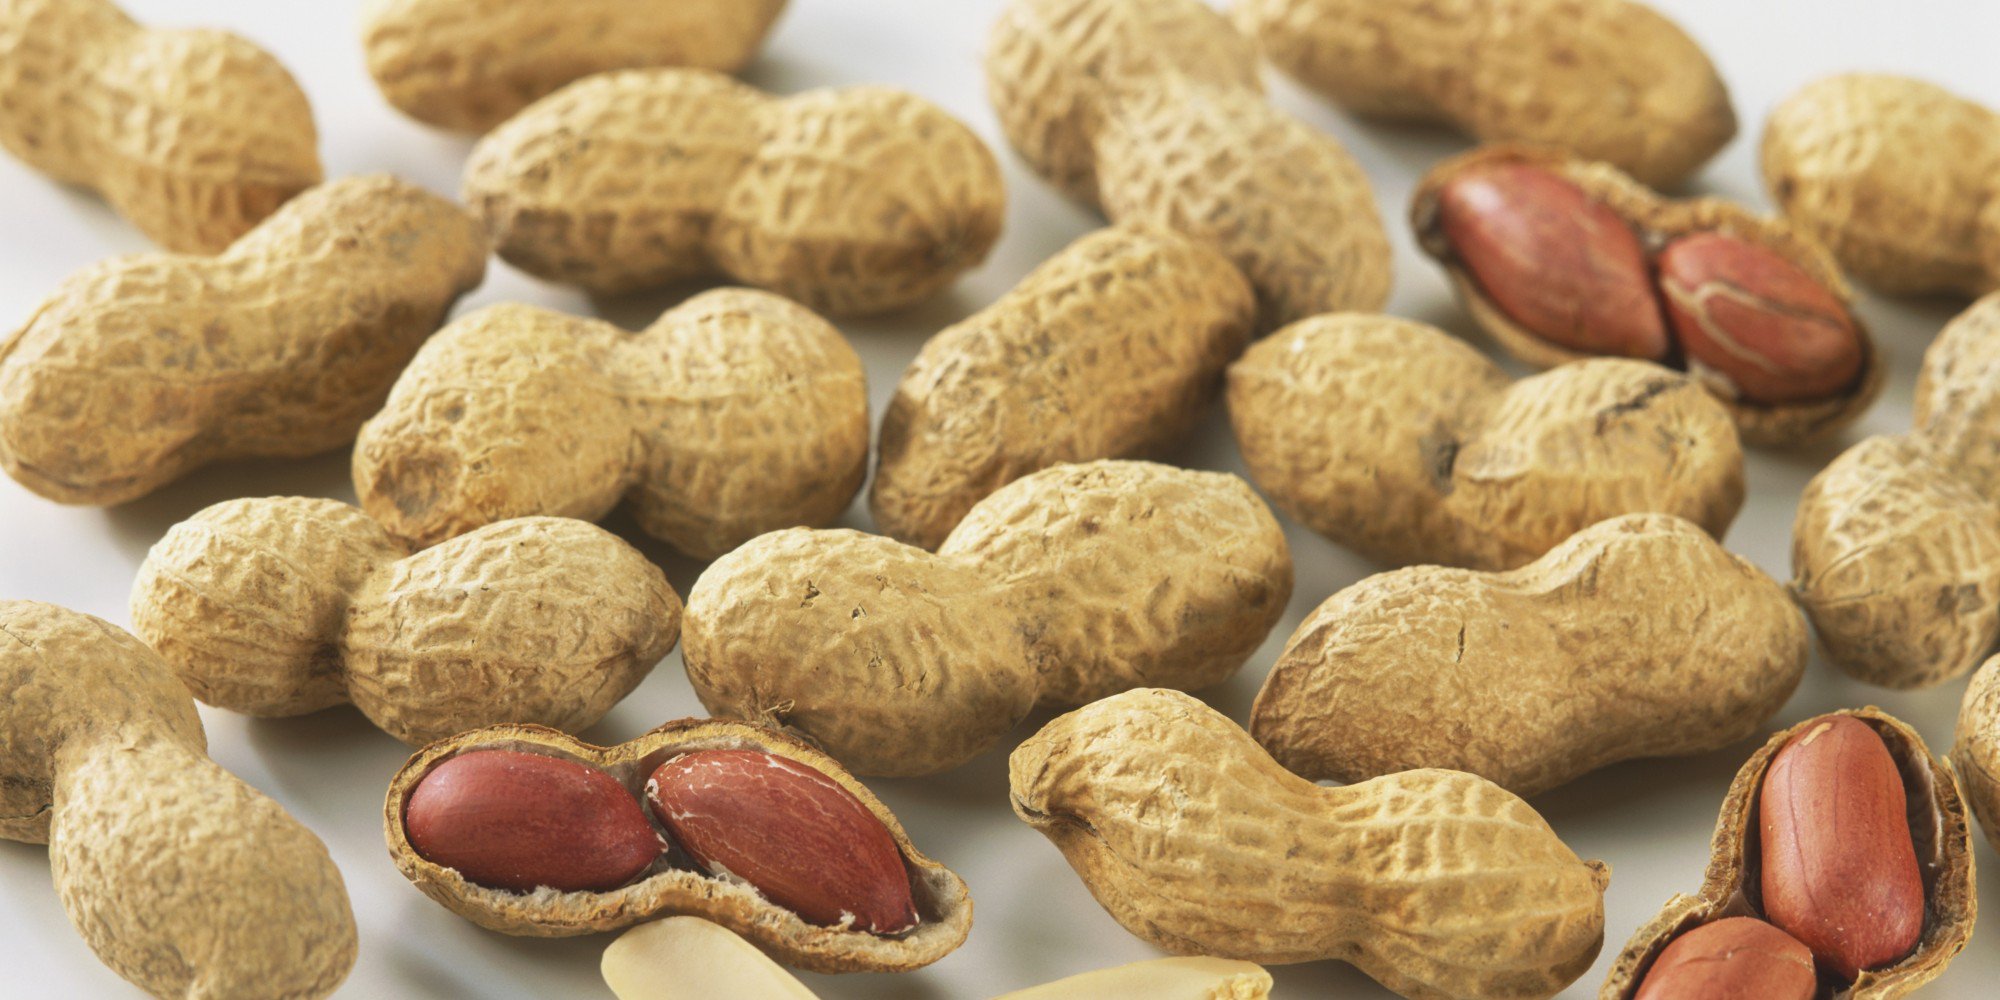 What Do Peanuts and Vaccines Have In Common?